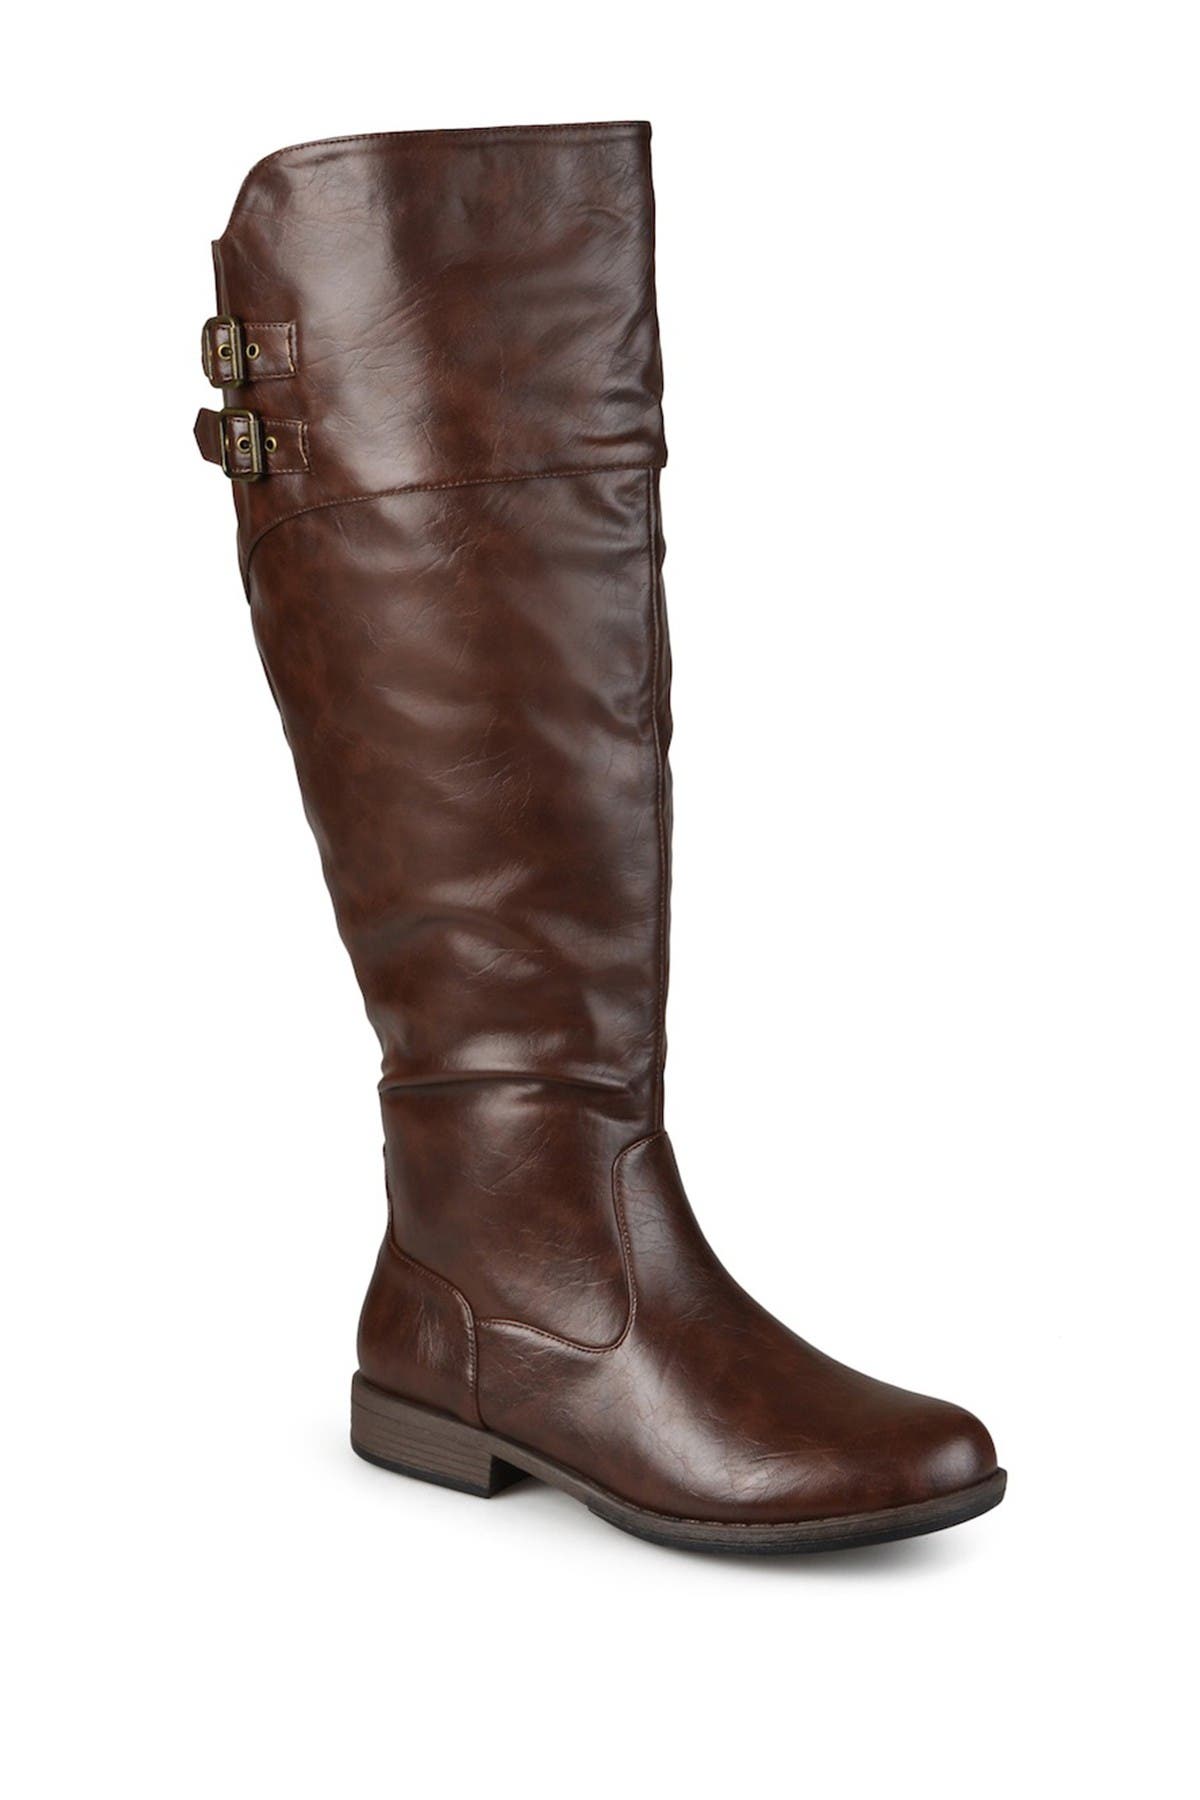 double wide womens boots